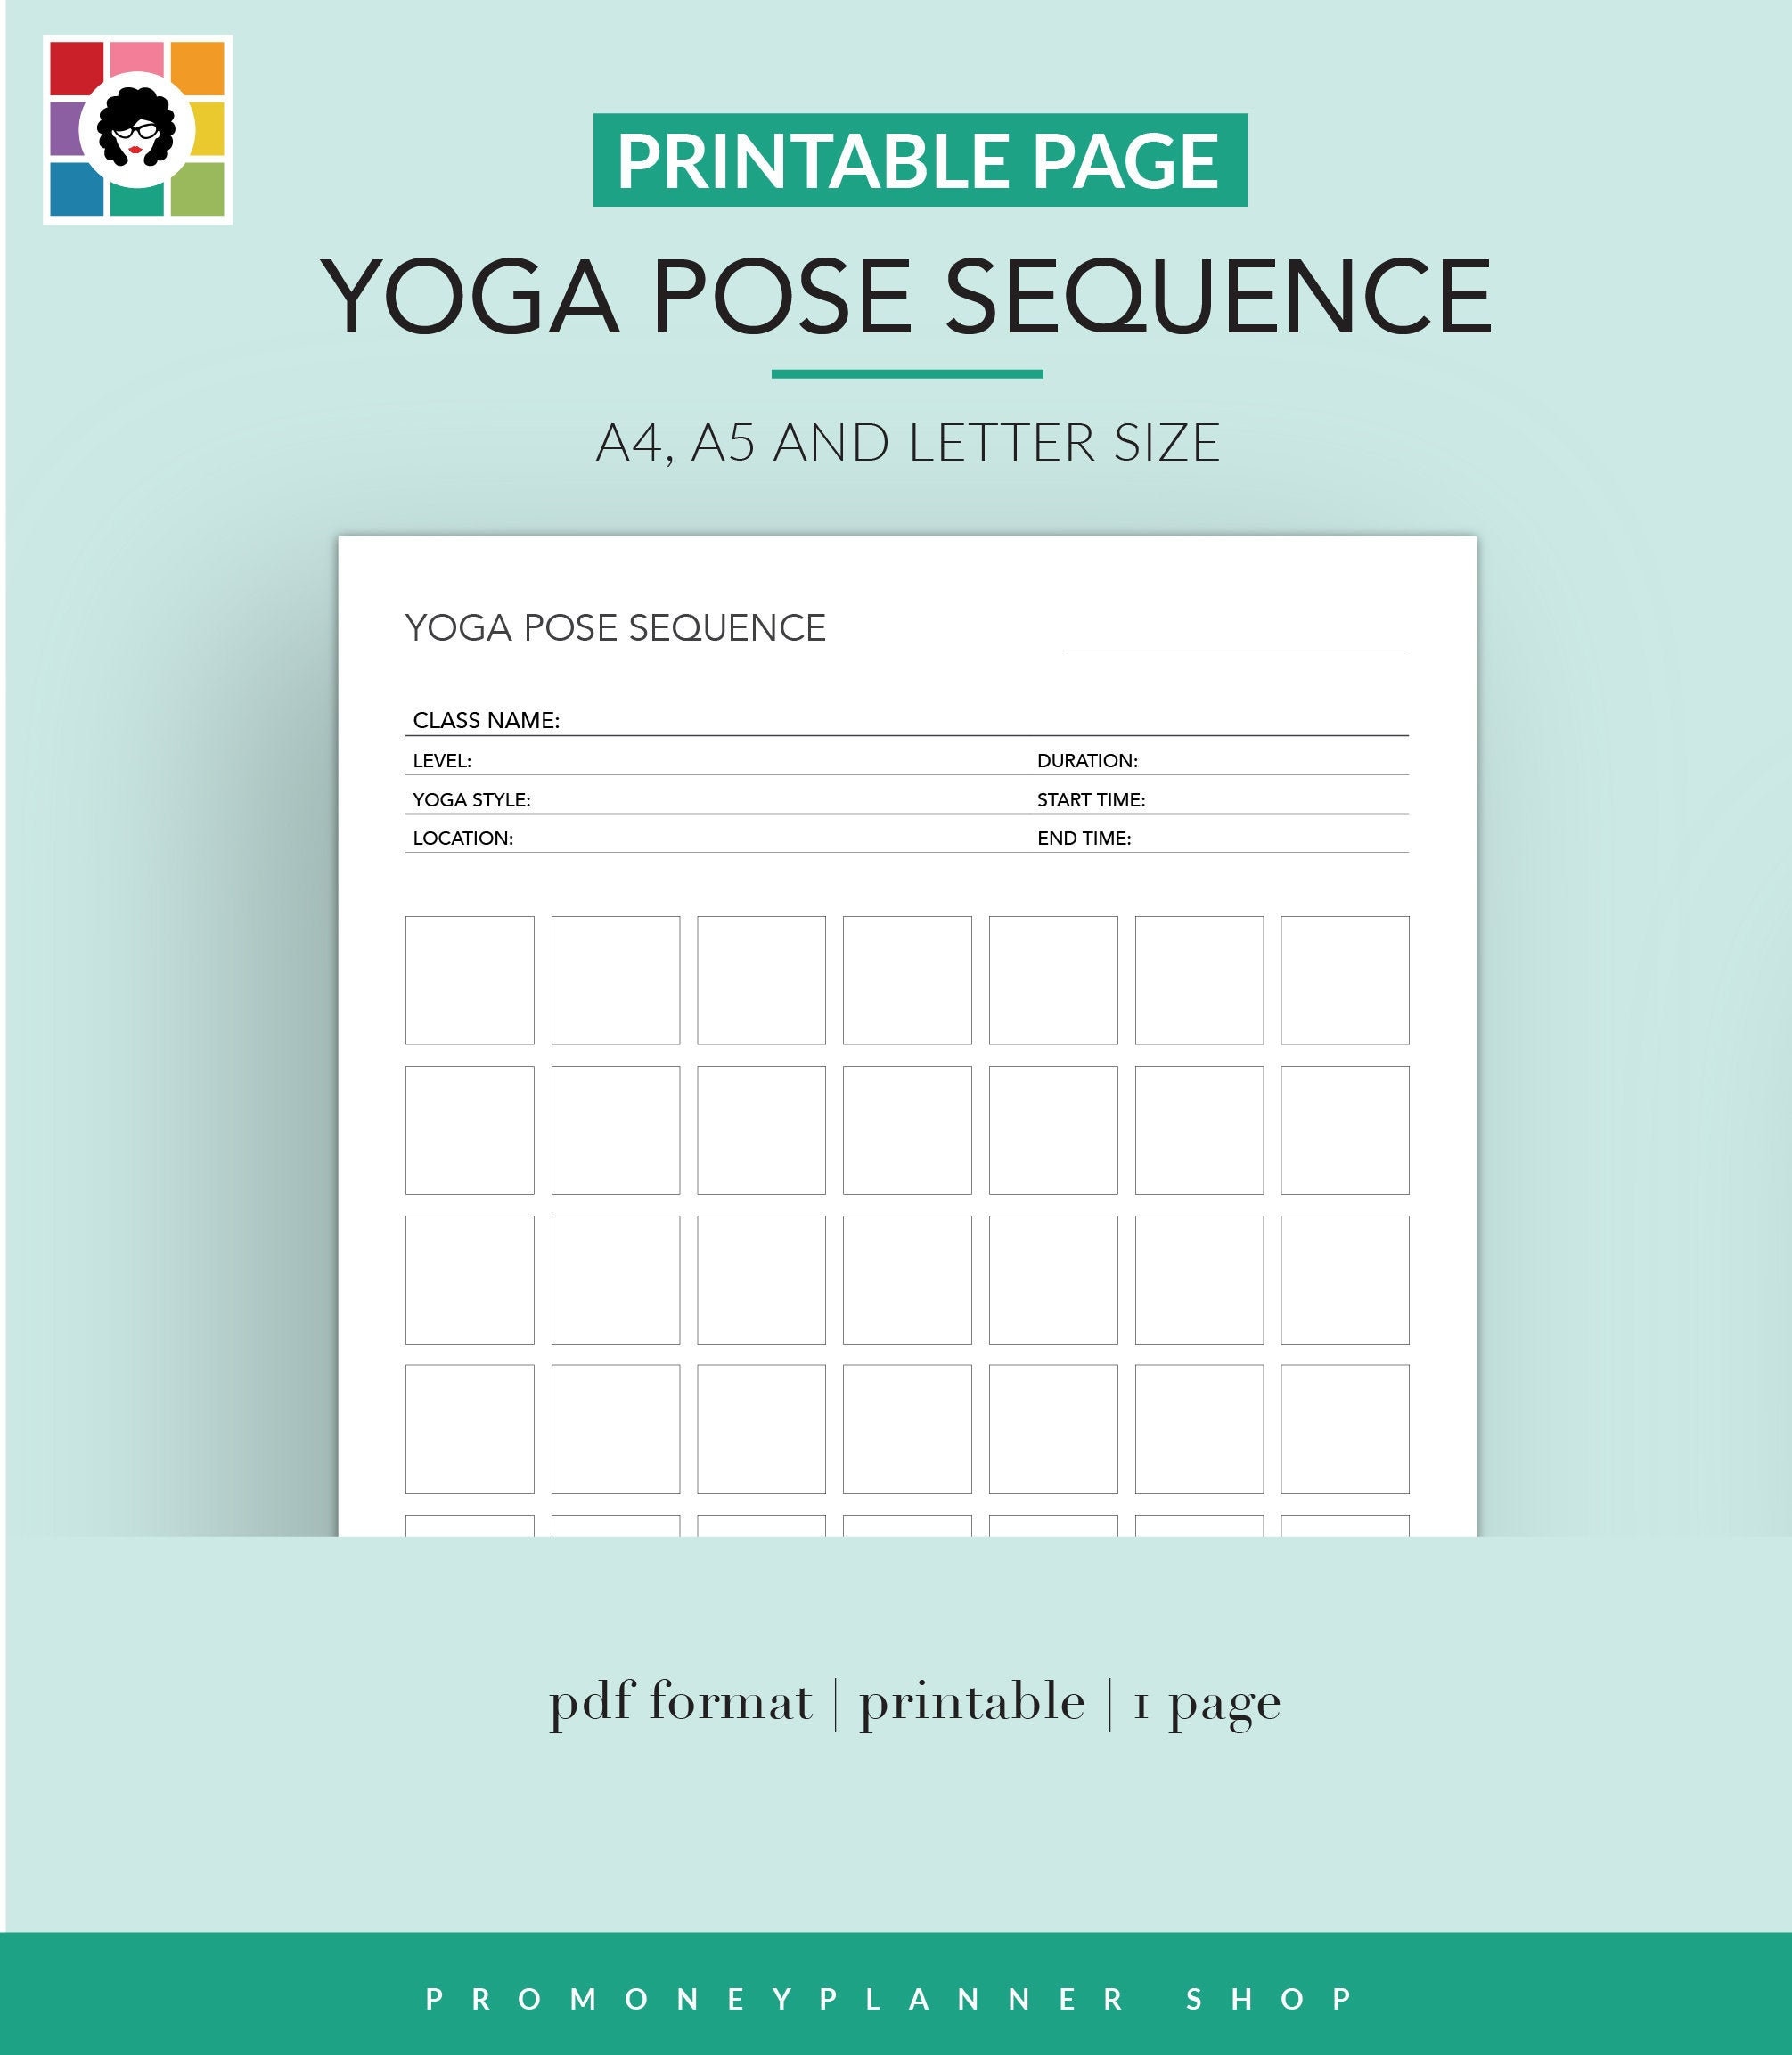 yoga-pose-sequence-yoga-instructor-planner-yoga-pose-sequences-etsy-uk